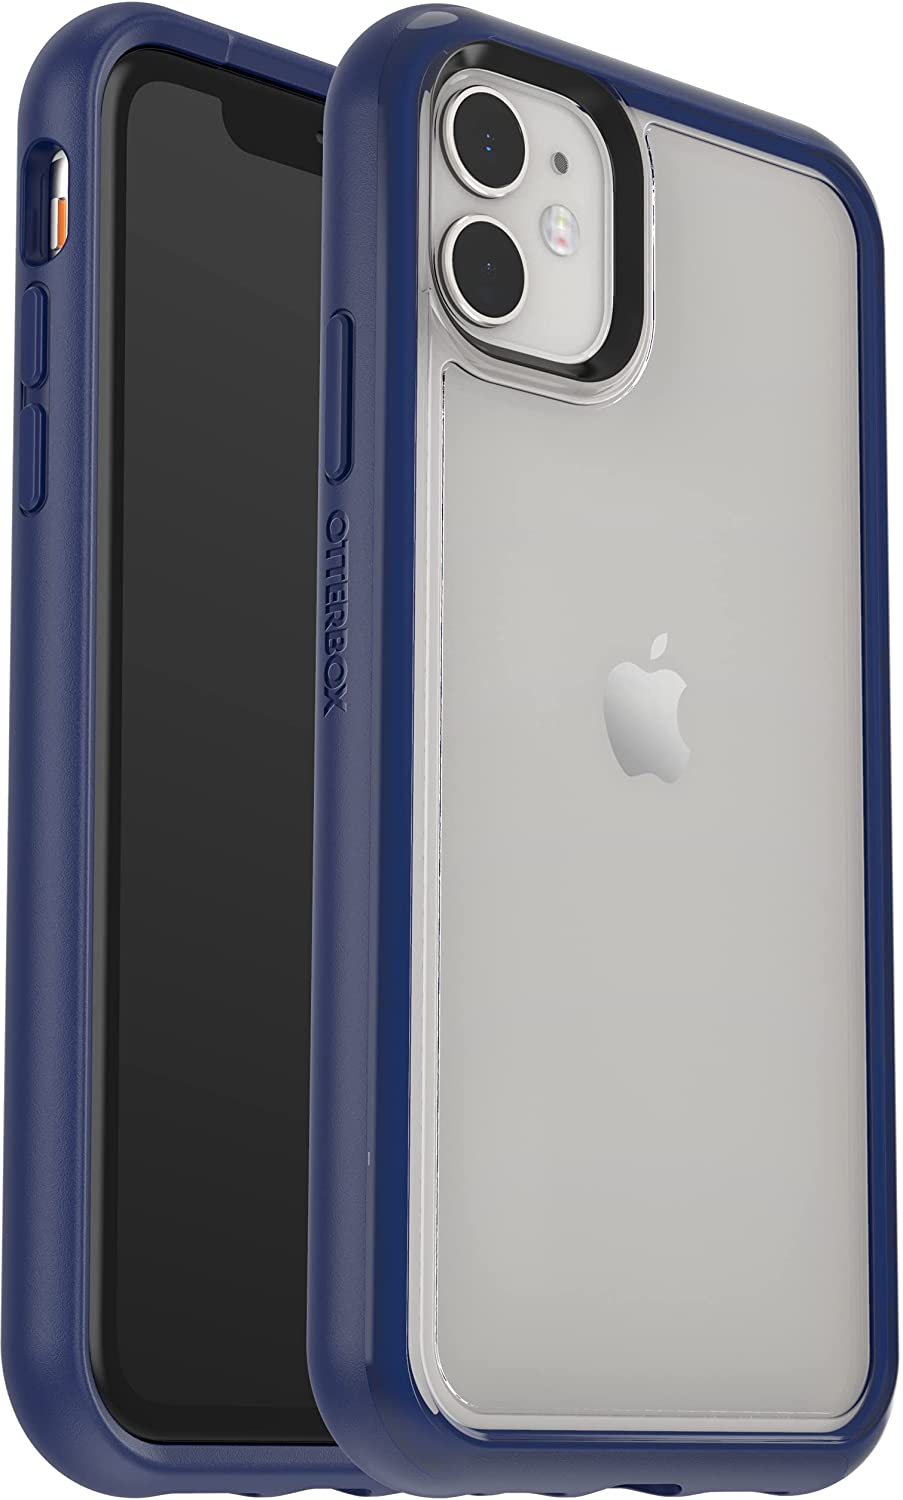 OtterBox Clear Protective Case for Apple iPhone 11 - Indigo Bliss Blue (New)